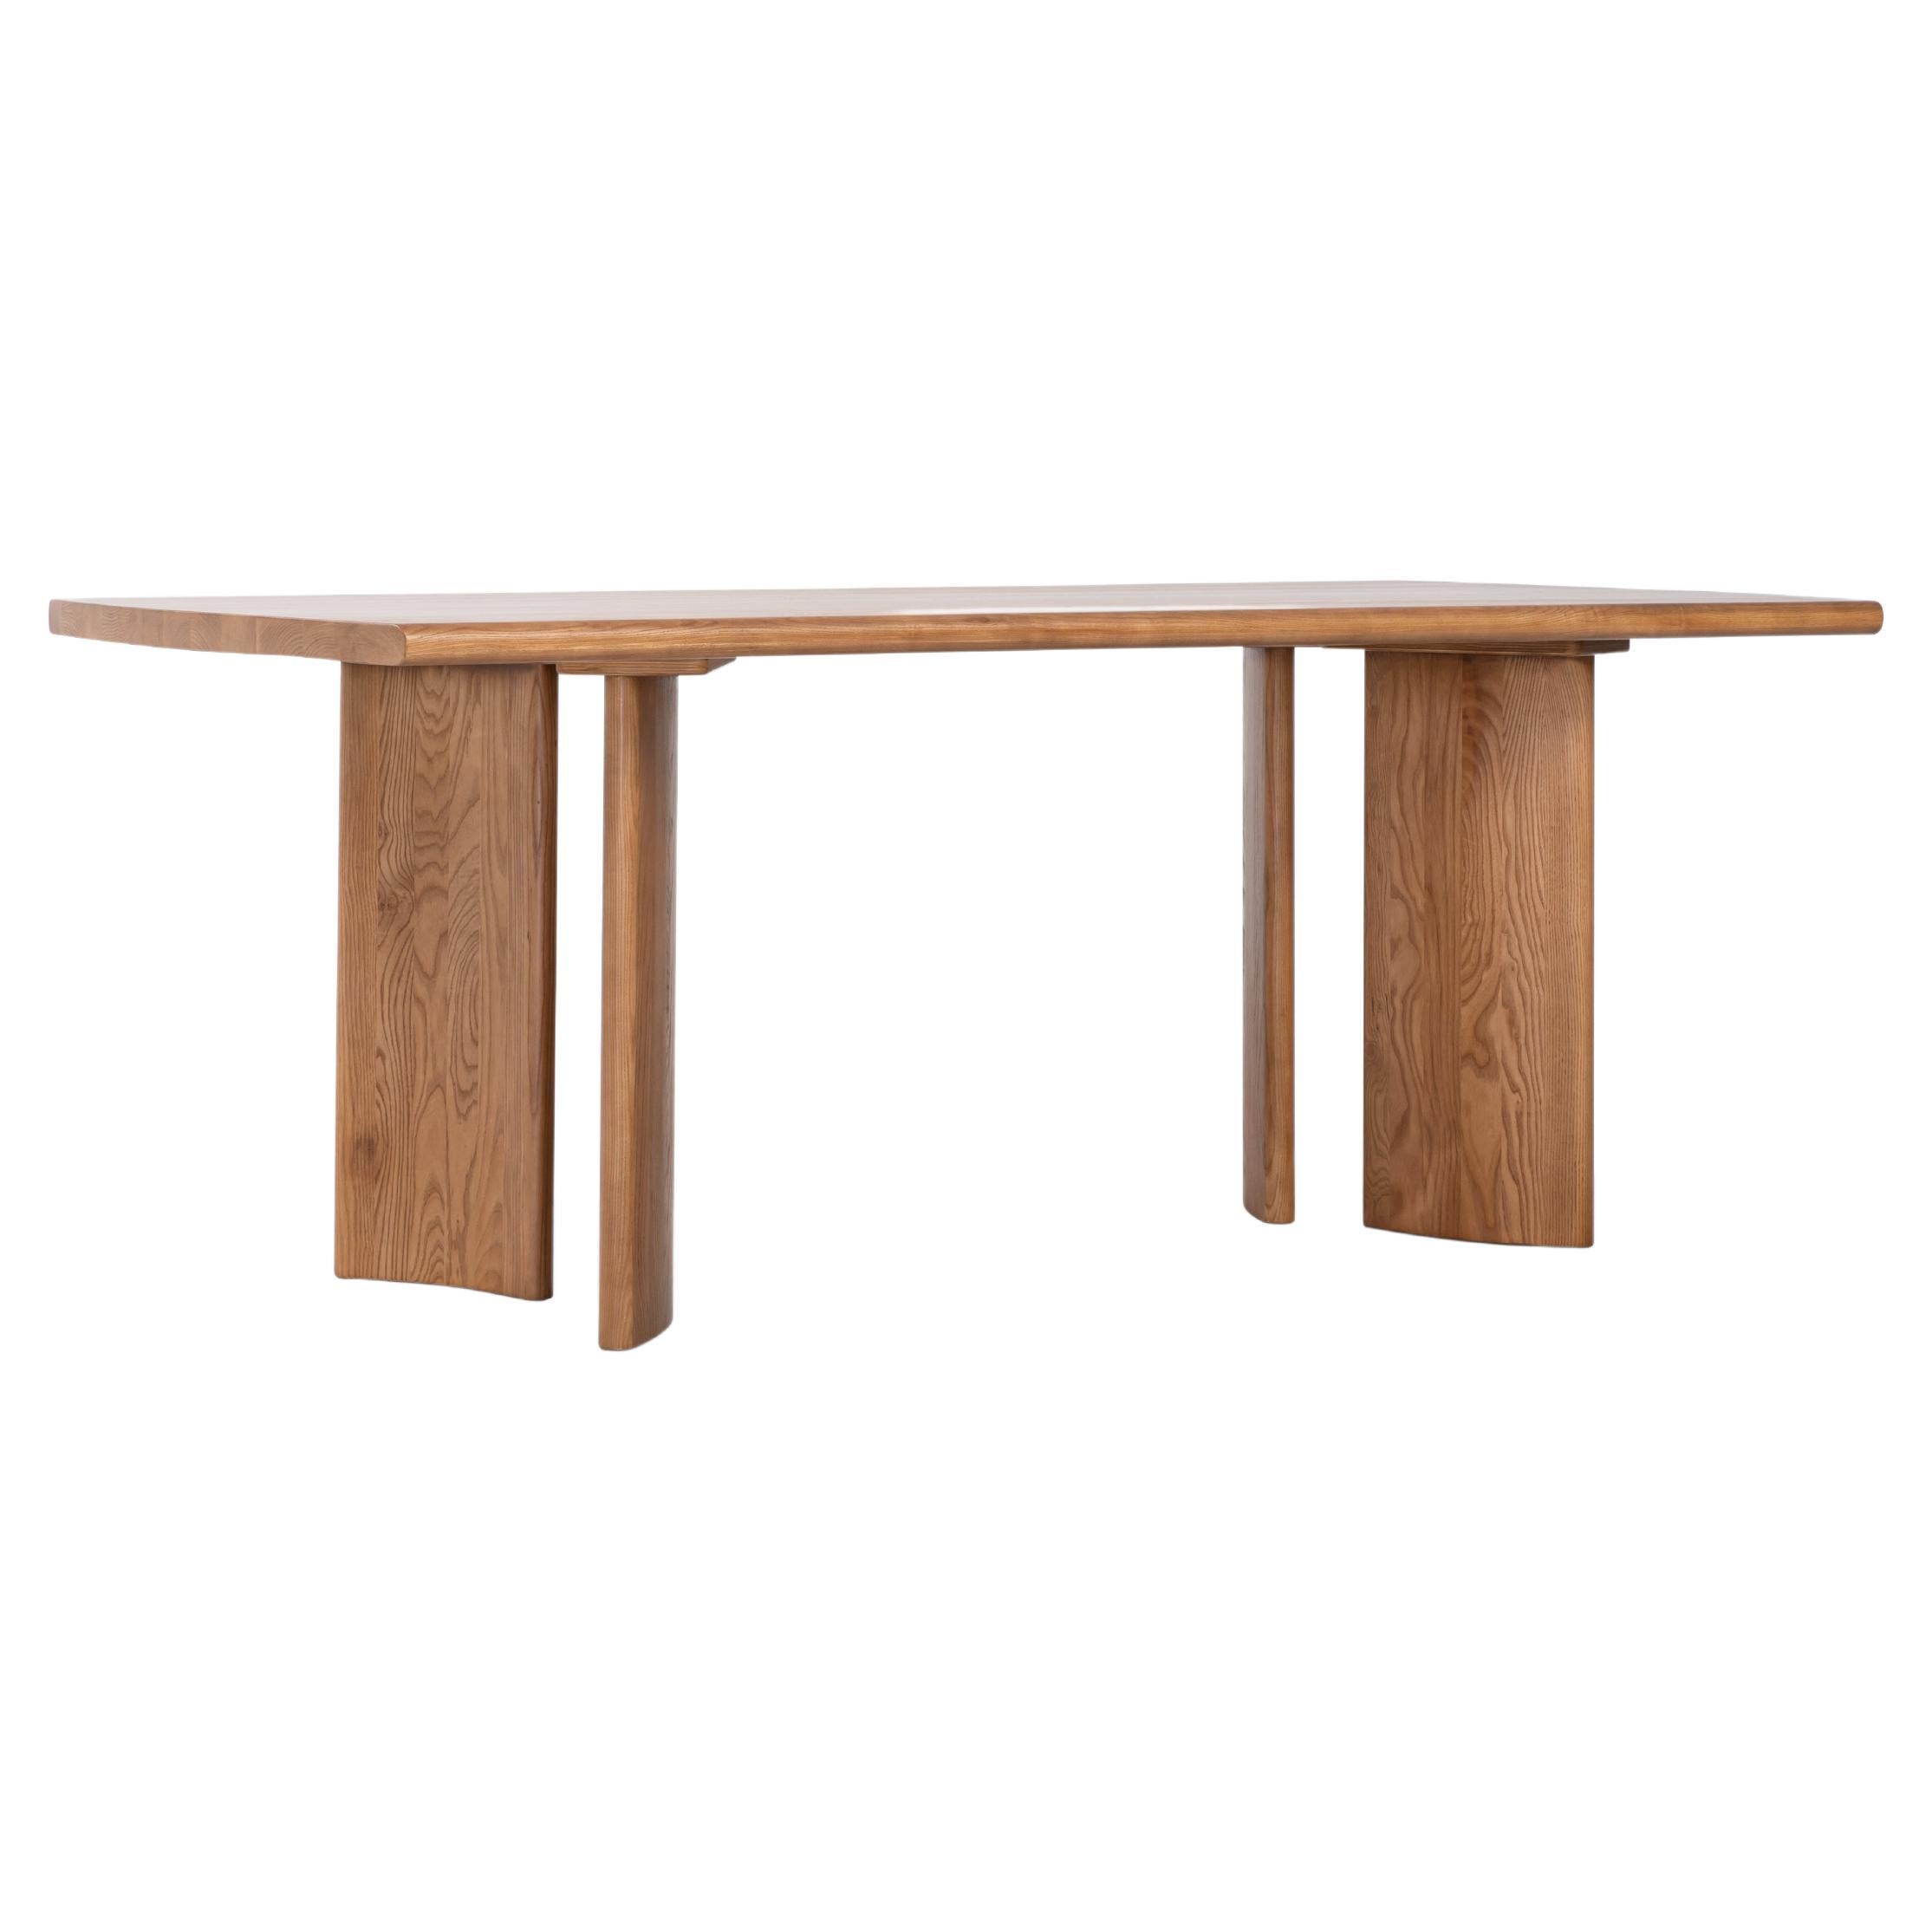 Crest Table 78" by Sun at Six, Sienna, Minimalist Dining Table in Wood For Sale